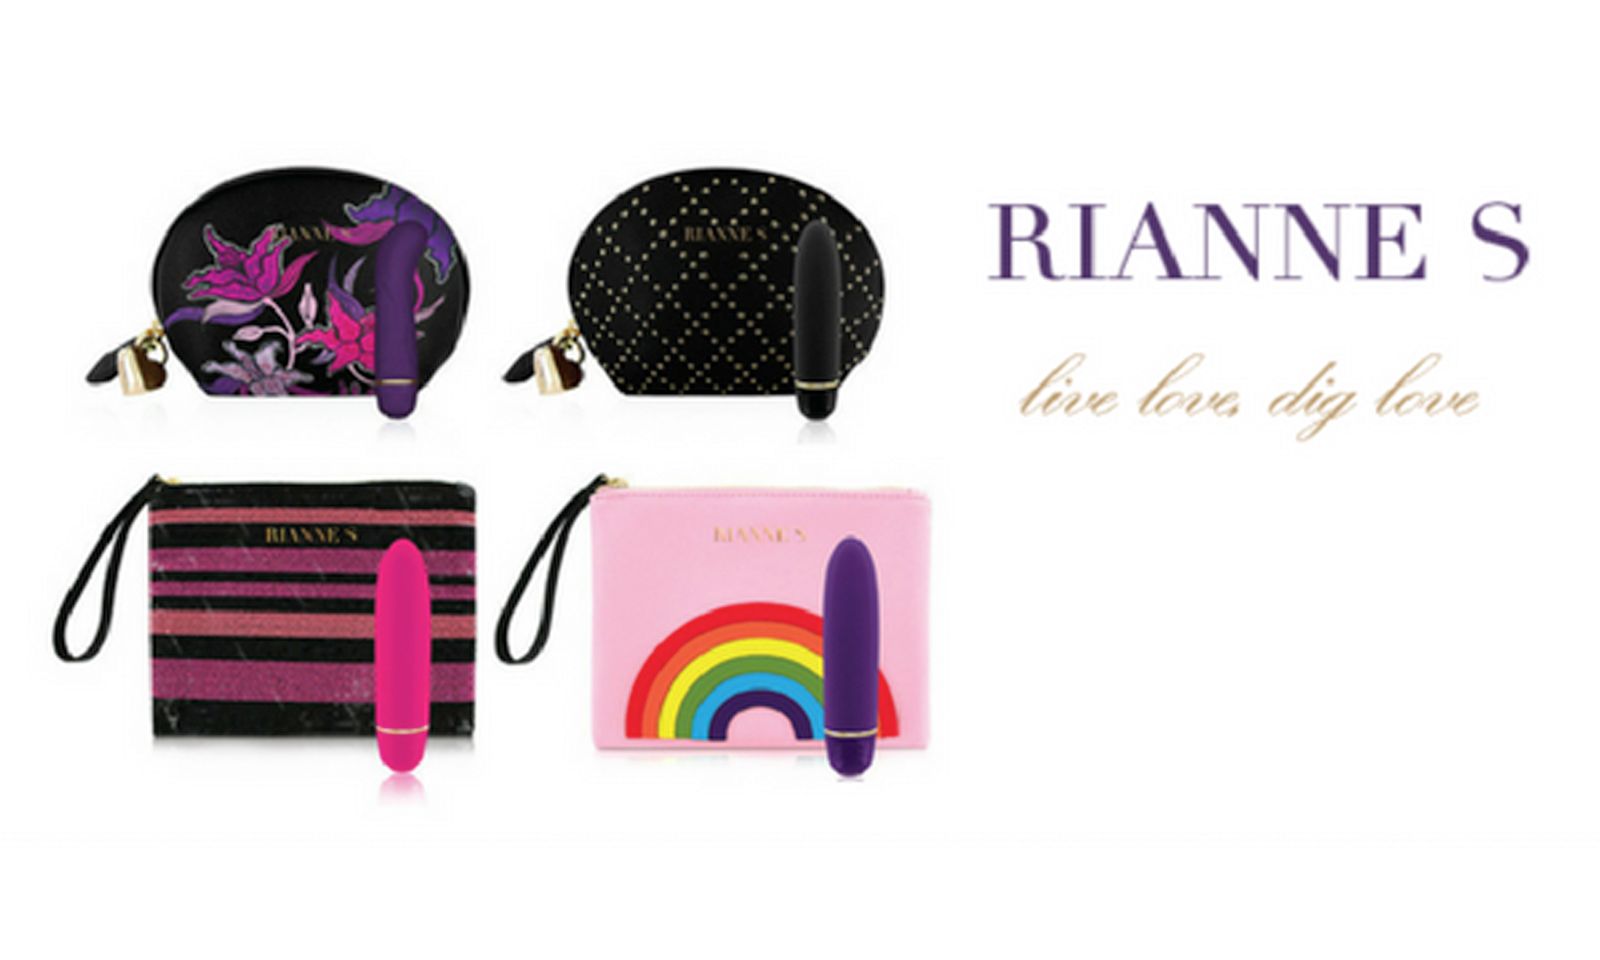 Eropartner Stocking 4 New Items From Rianne S